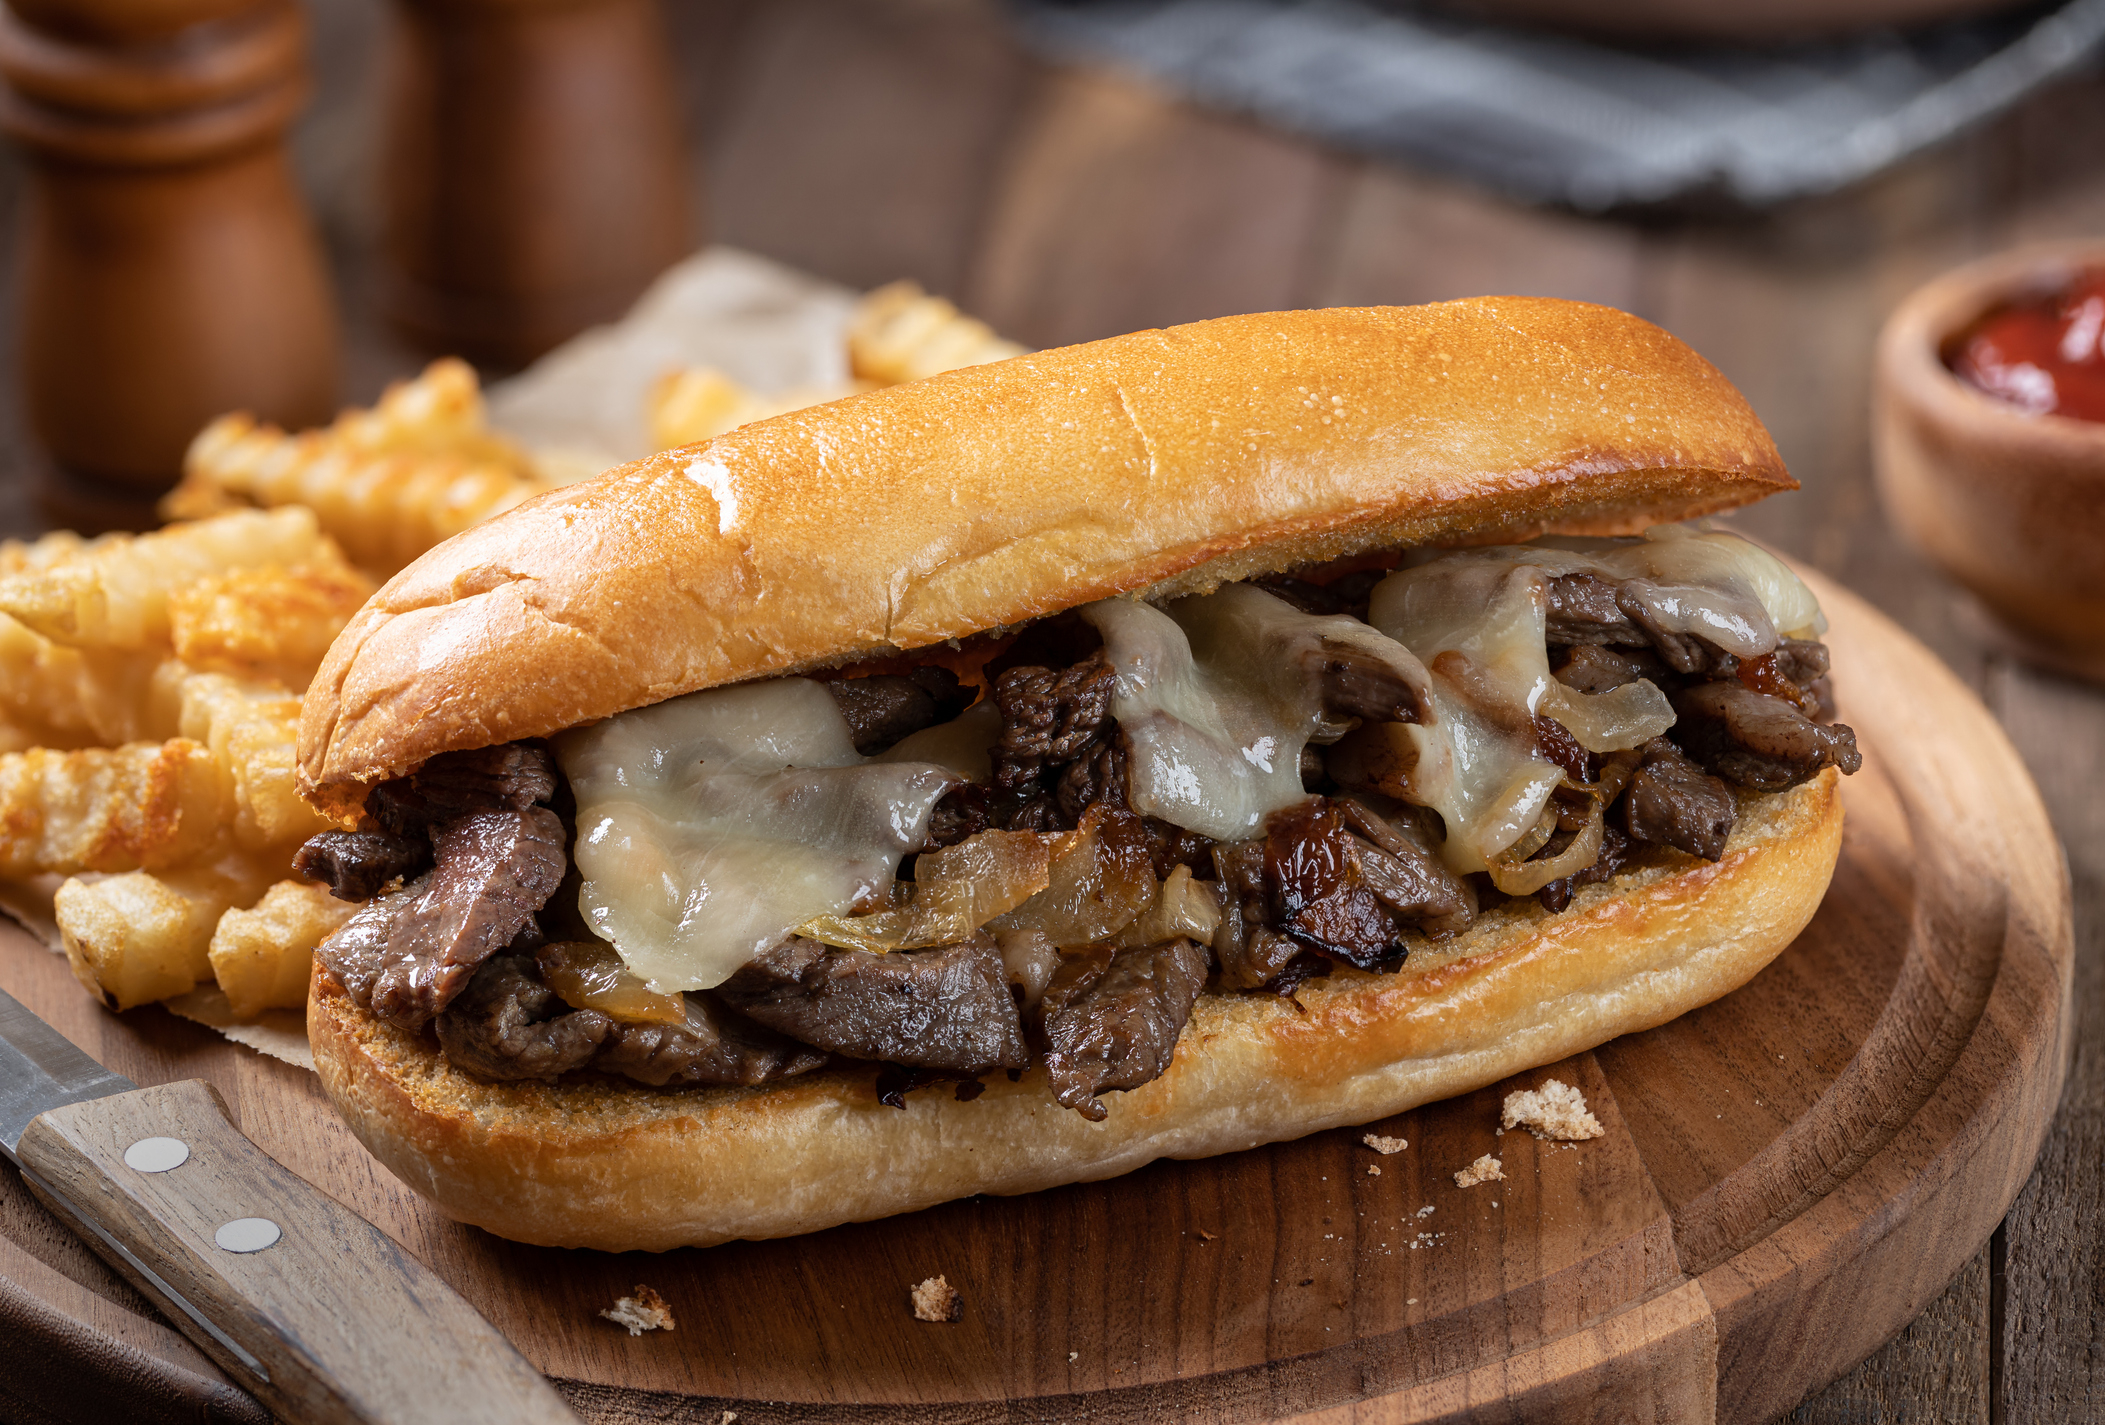 Steak and cheese sandwich on a hoagie roll with fries on a wooden board